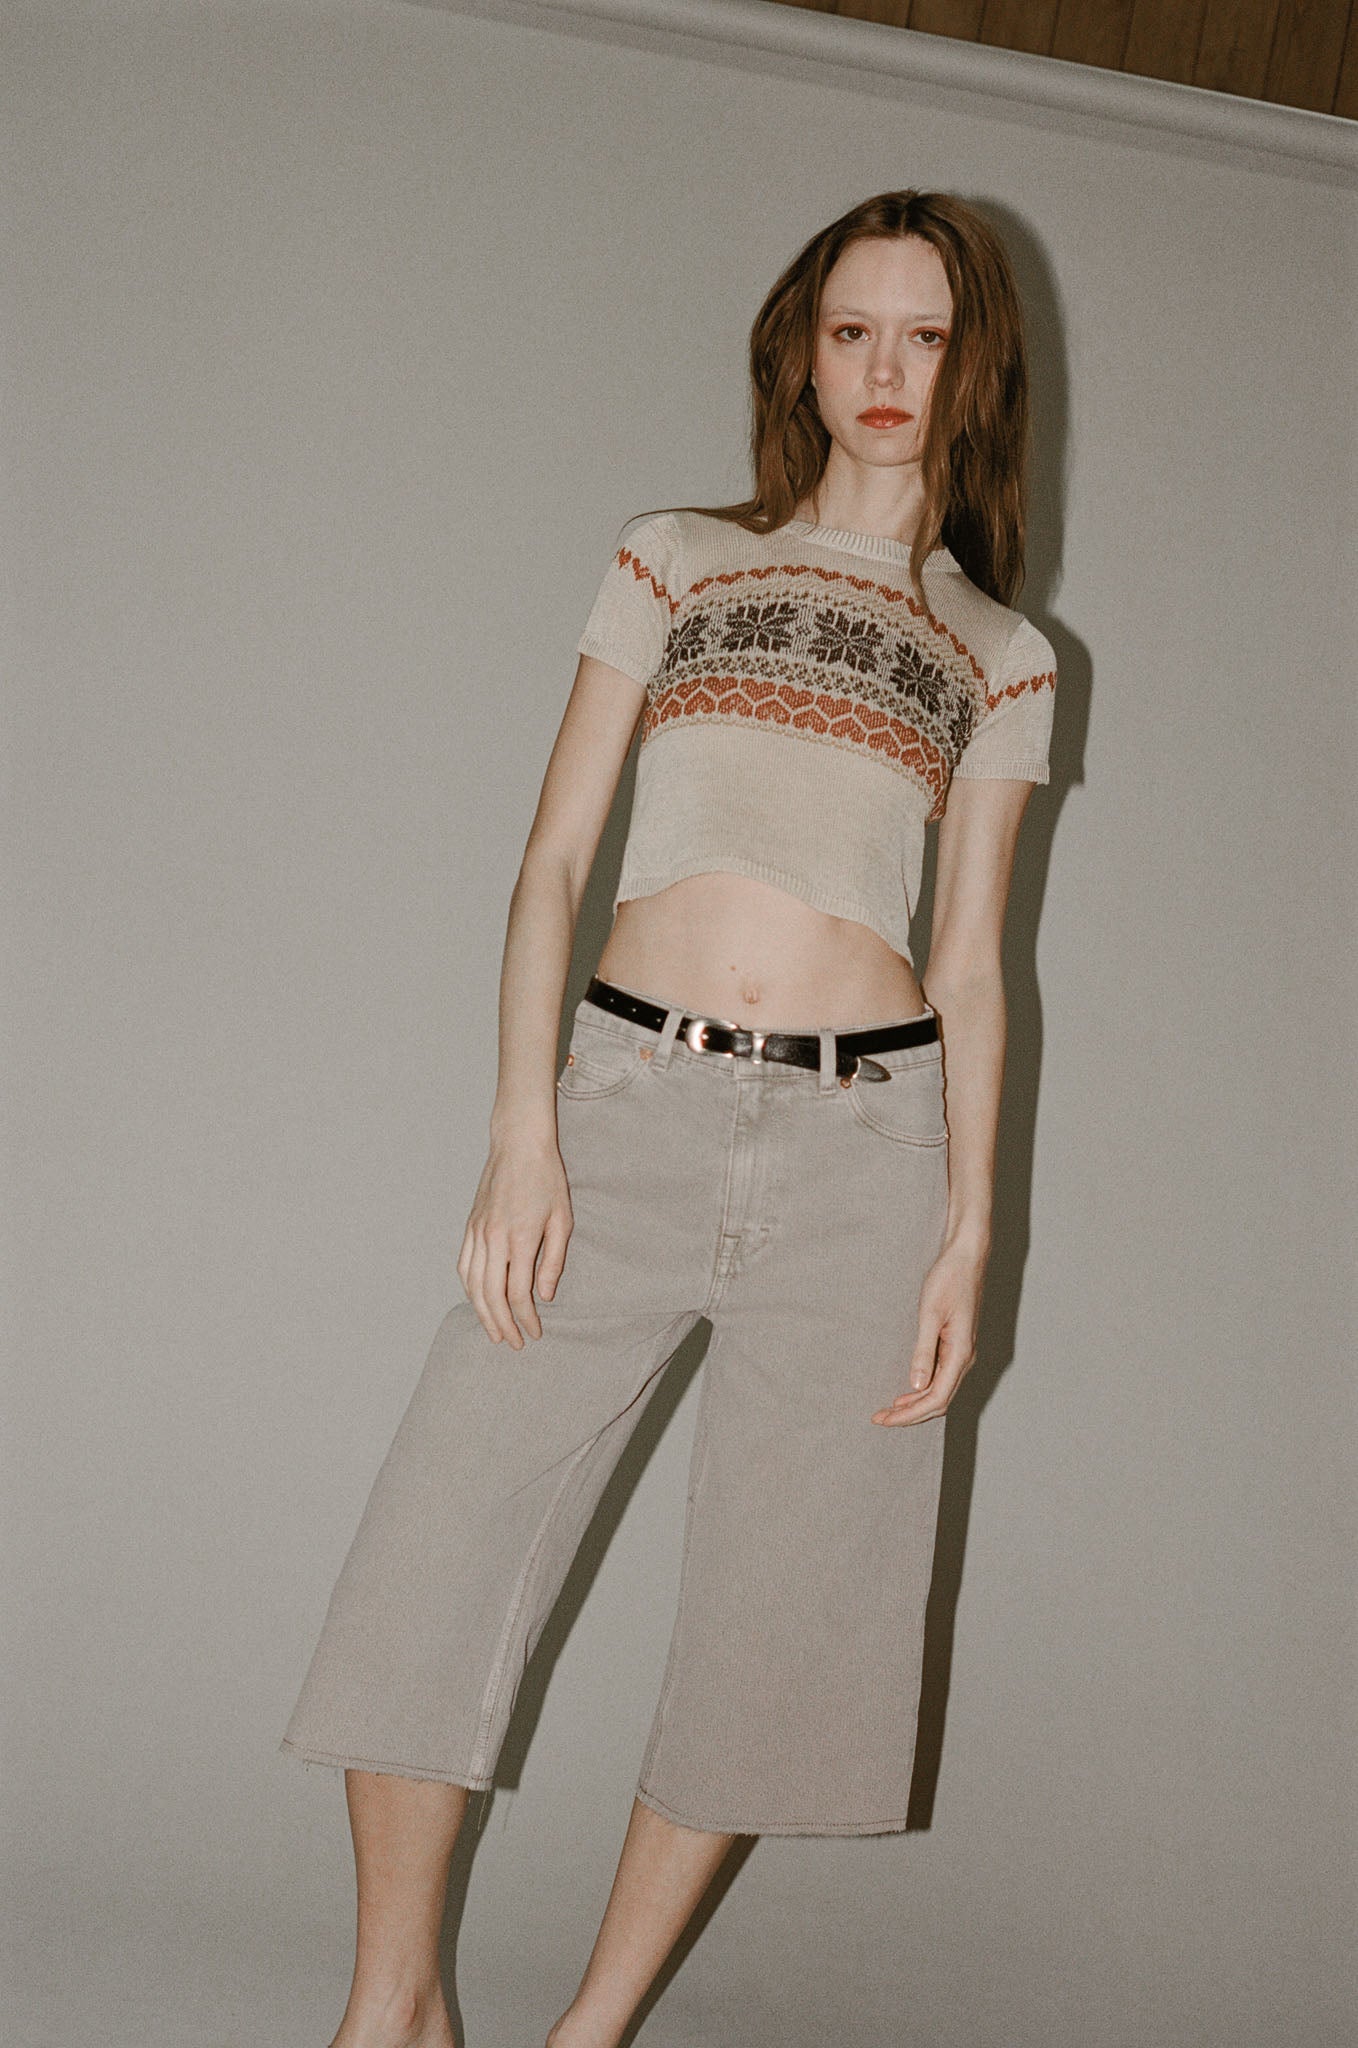 Our Legacy Knitted Cropped T-Shirt in Fairisle